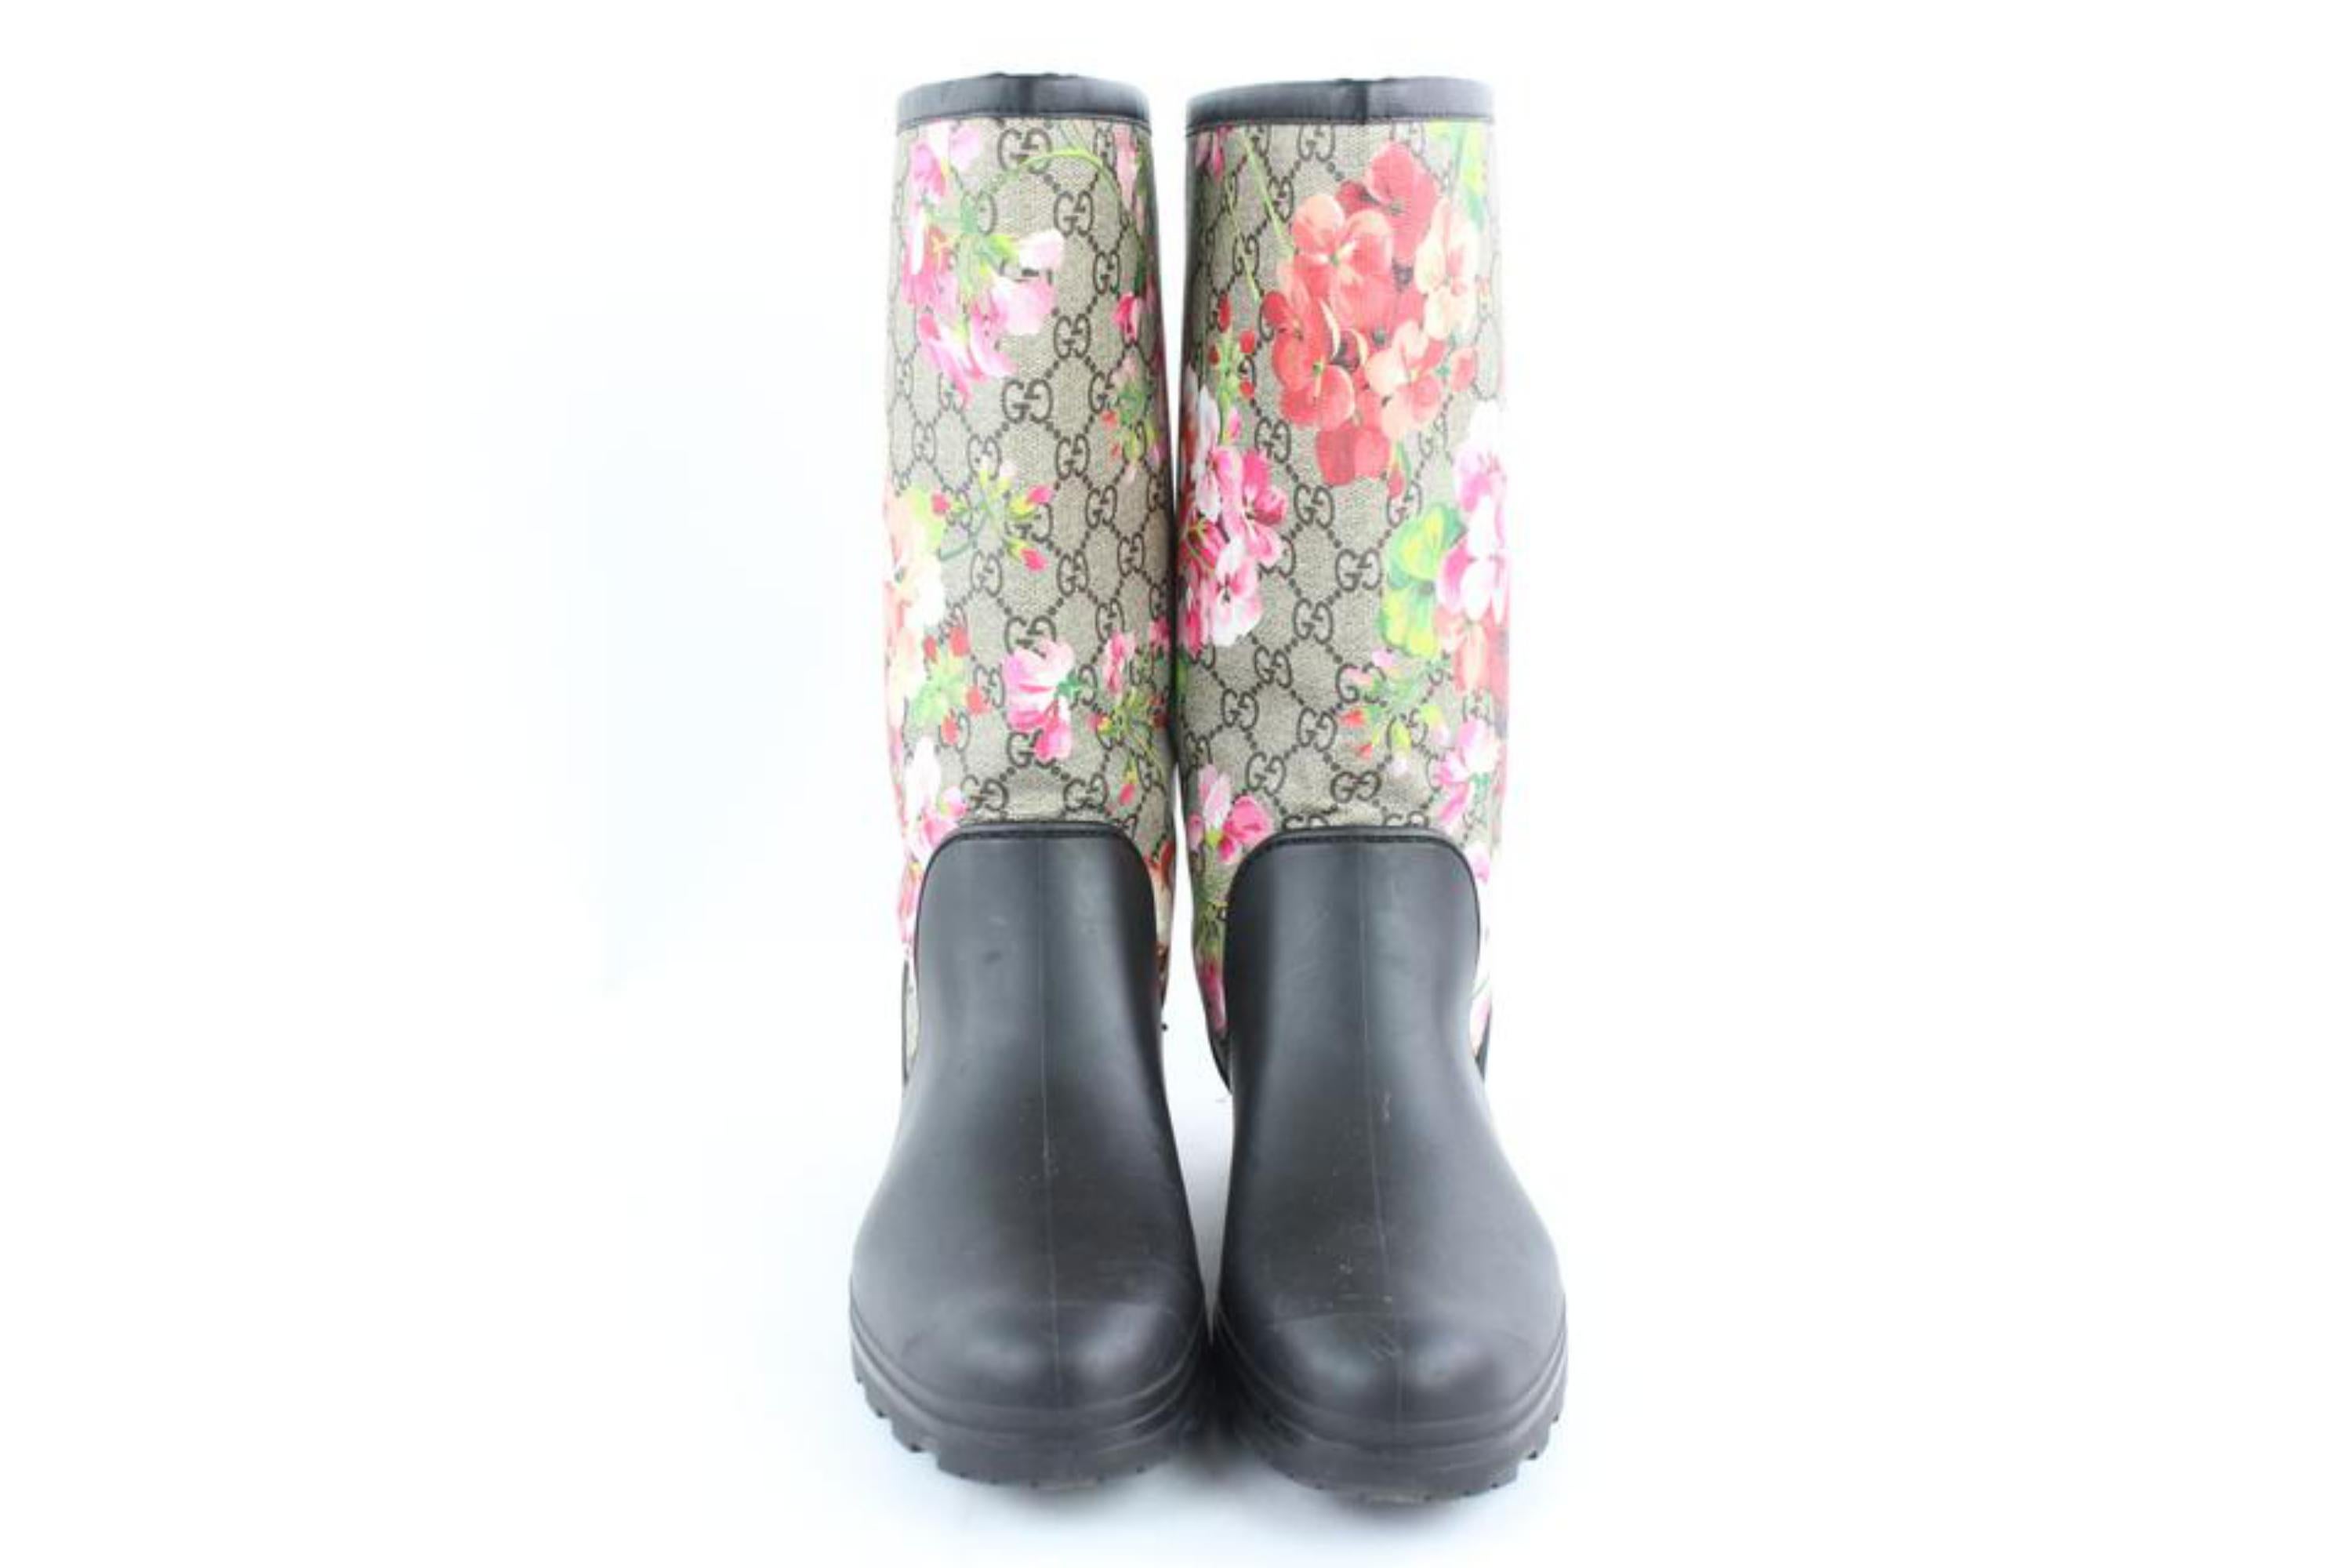 Women's Gucci Black Limited Supreme Prato Gg Blooms Rain Boots/Booties 24684511 For Sale